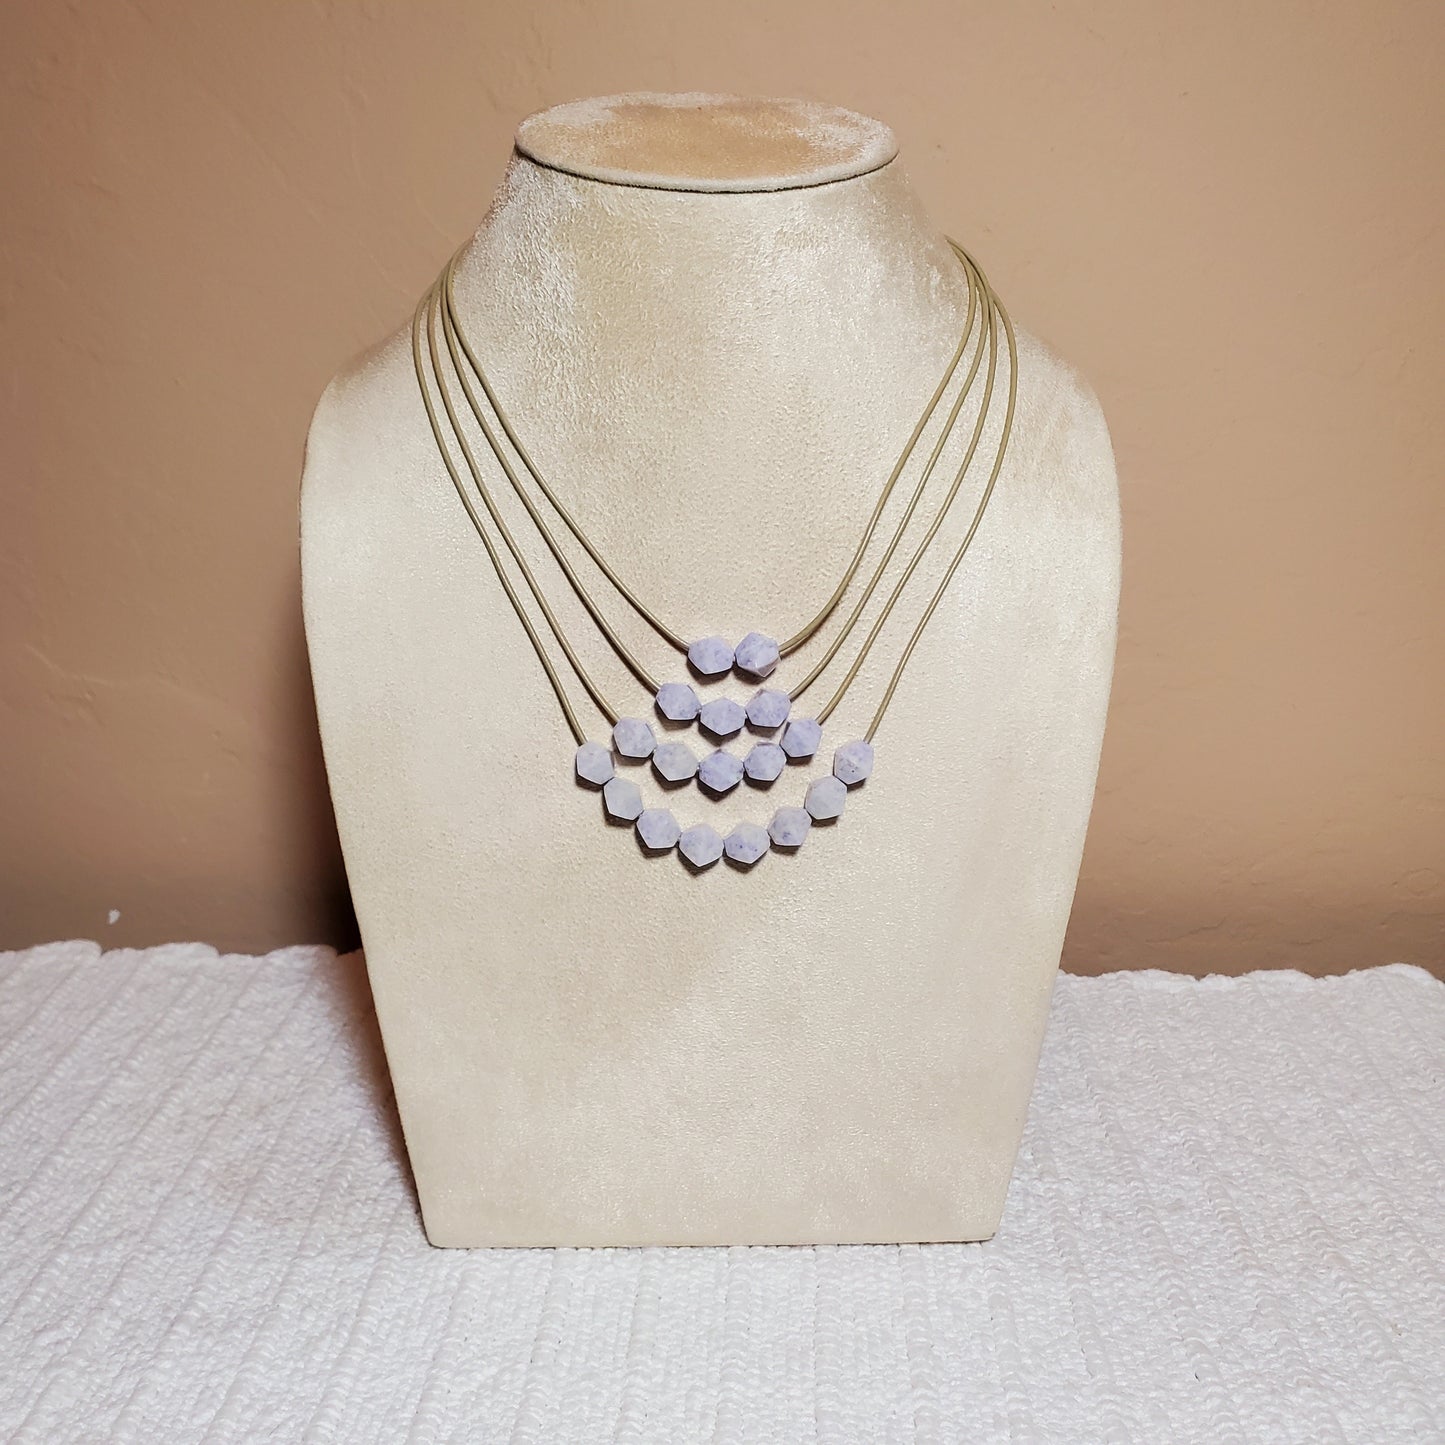 Jade Teared Lilac Necklace | Door County Jewelry by Wendy Carpenter | SALE ITEM